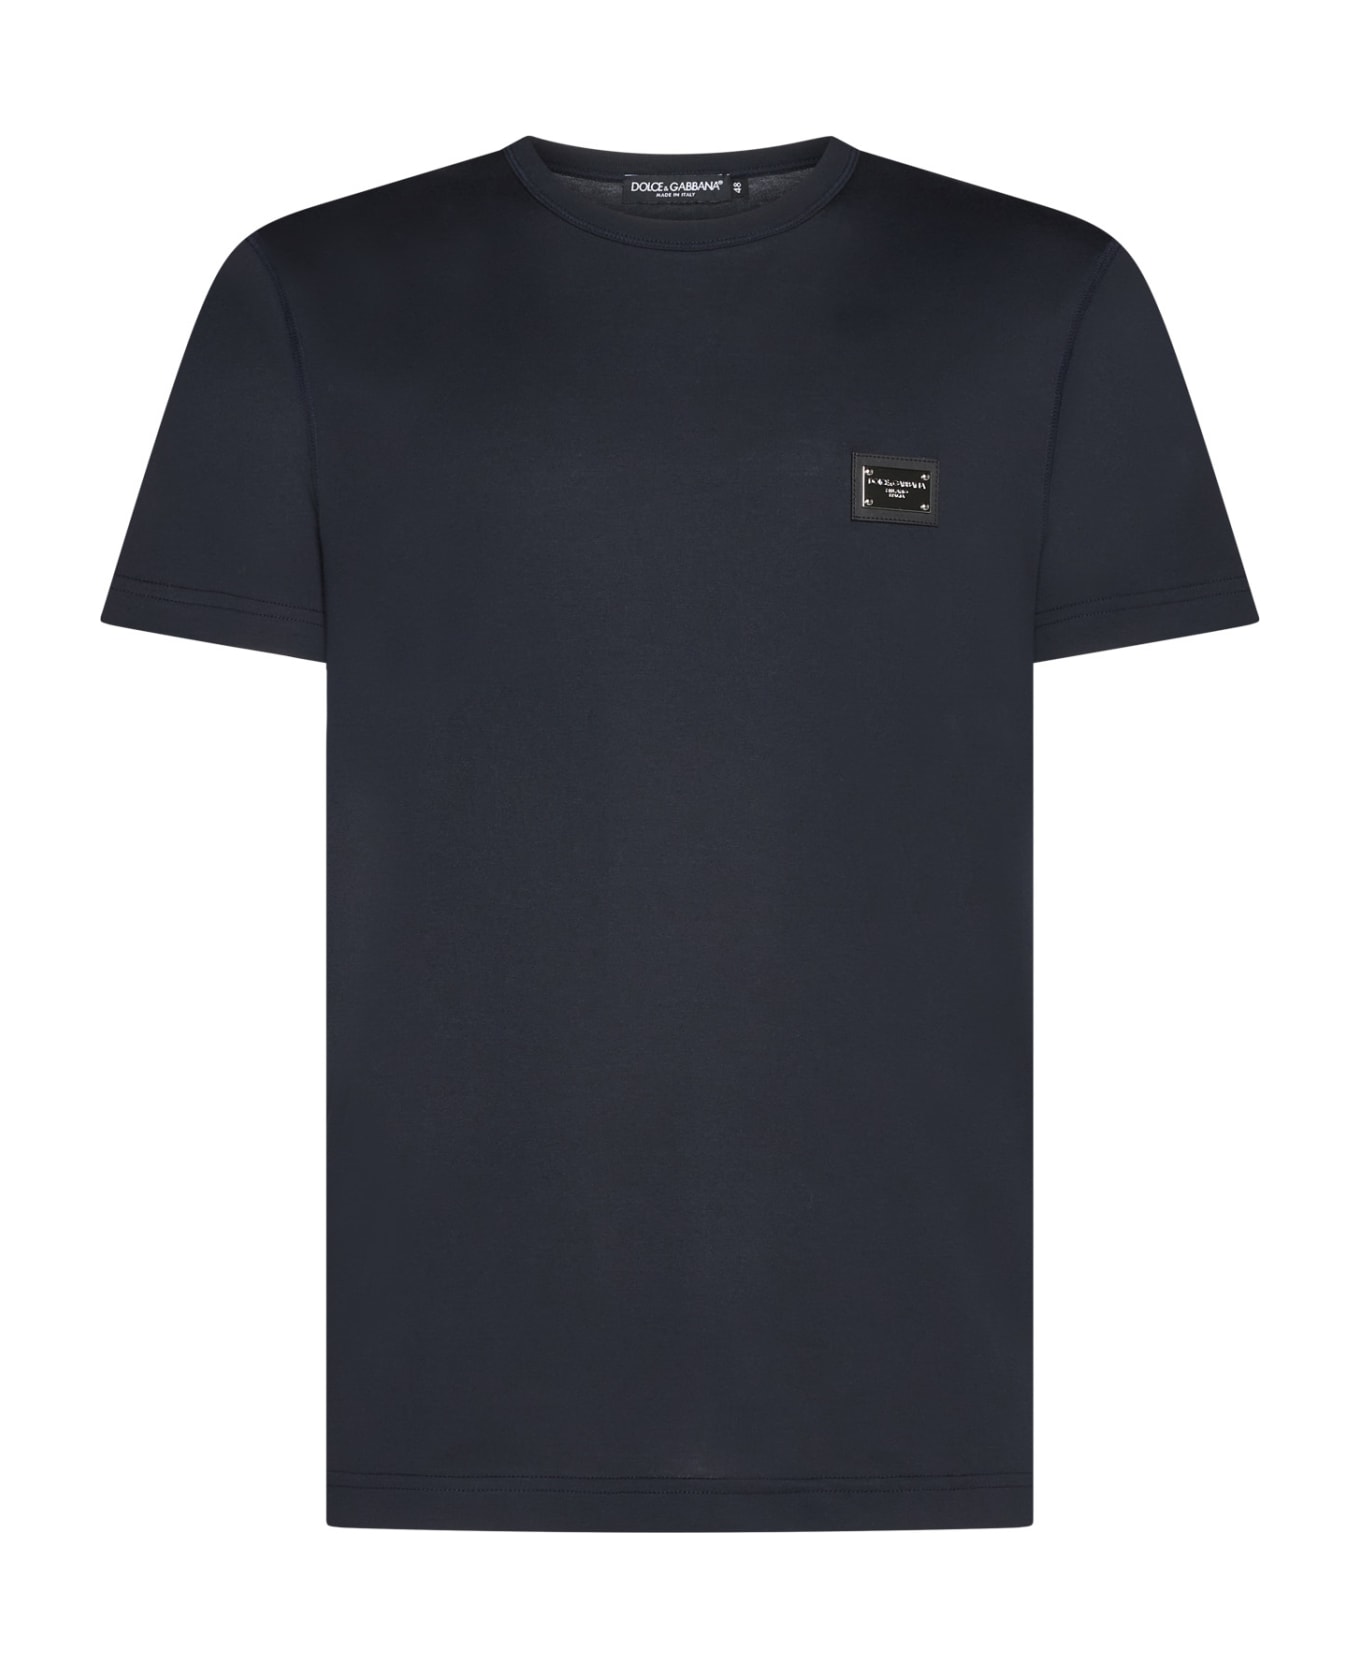 Dolce & Gabbana T-shirt With Logo Plaque - Blu scurissimo 1 シャツ